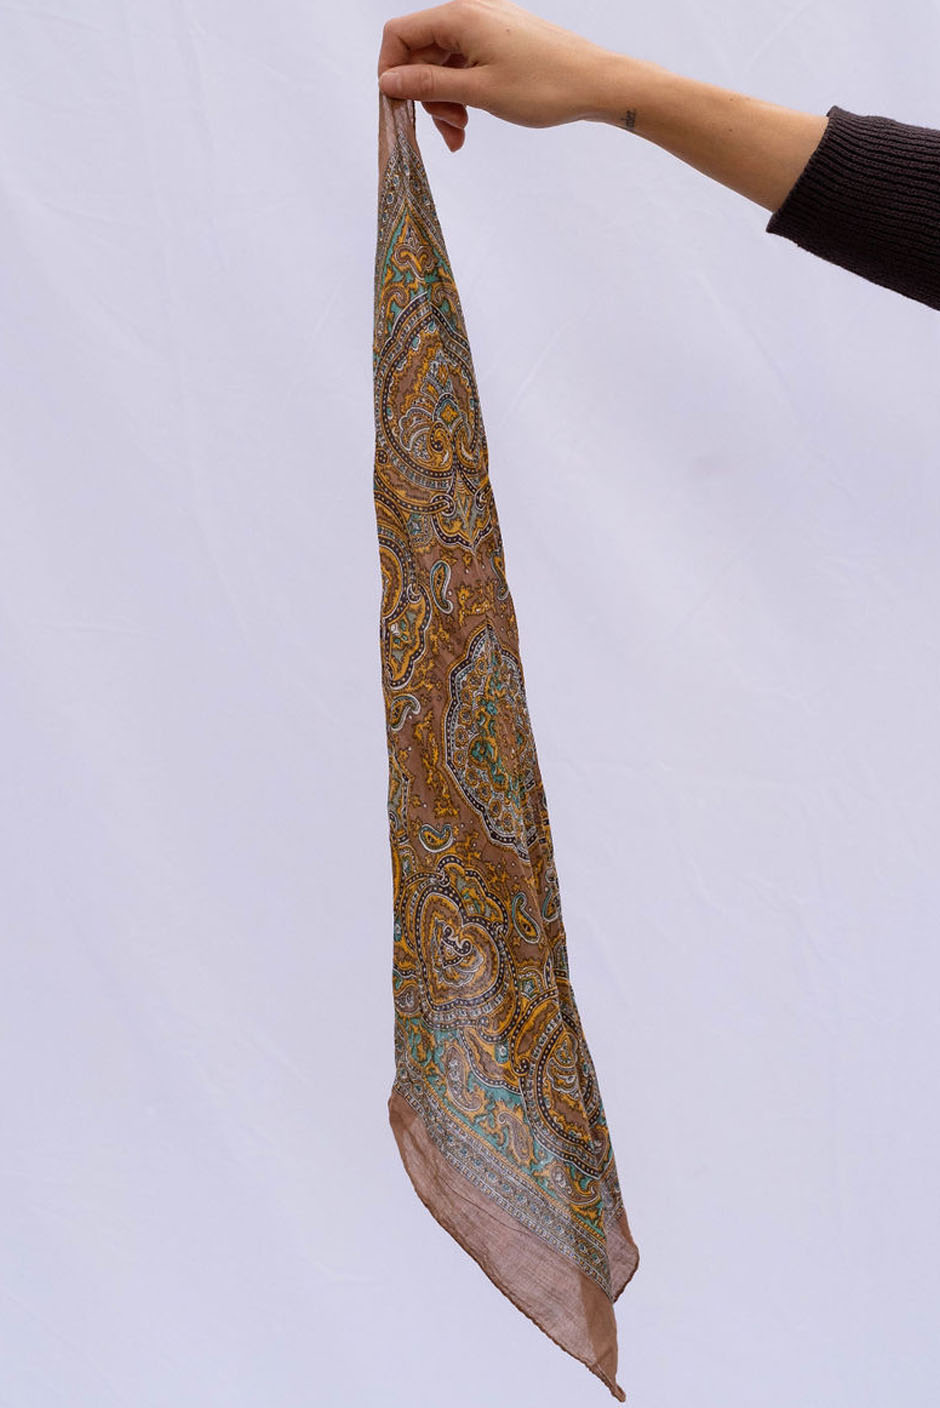 Vintage Freya bandana in Latte Brown handcrafted in India Featuring a multicolor paisley print for women by Panero Clothing. Full view.